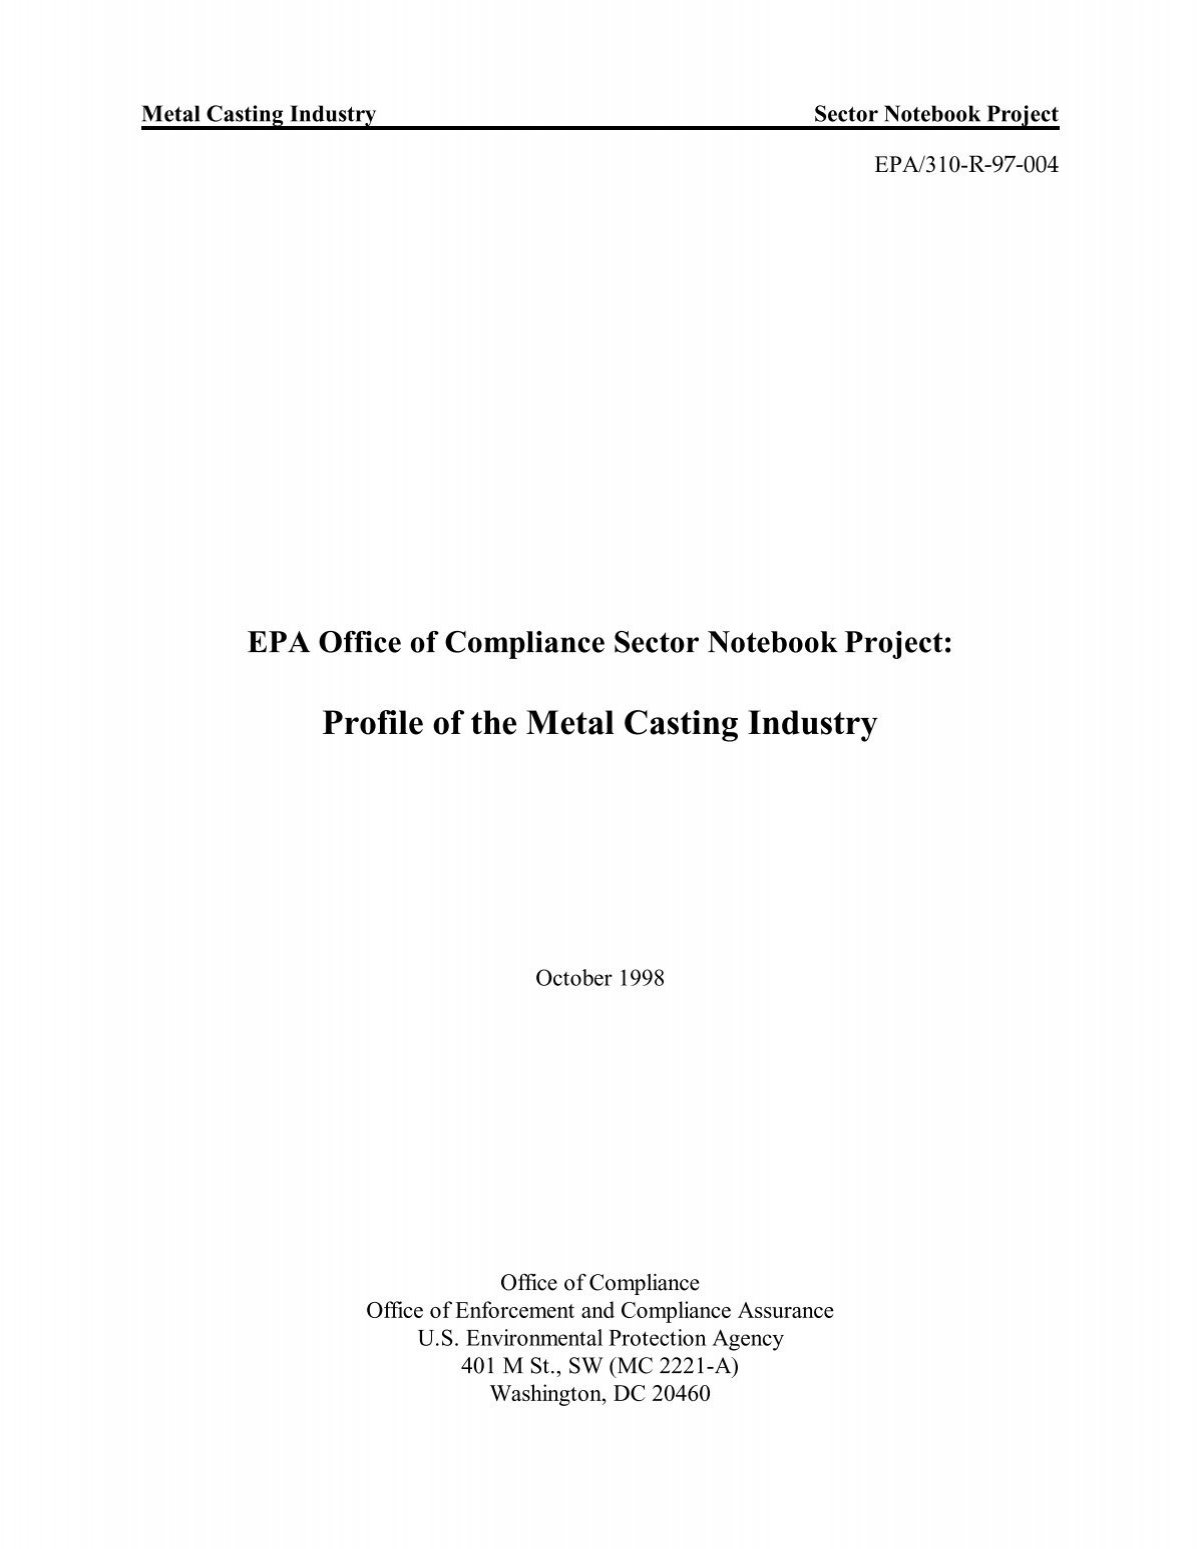 EPA Office of Compliance Sector Notebook Project - Profile of the